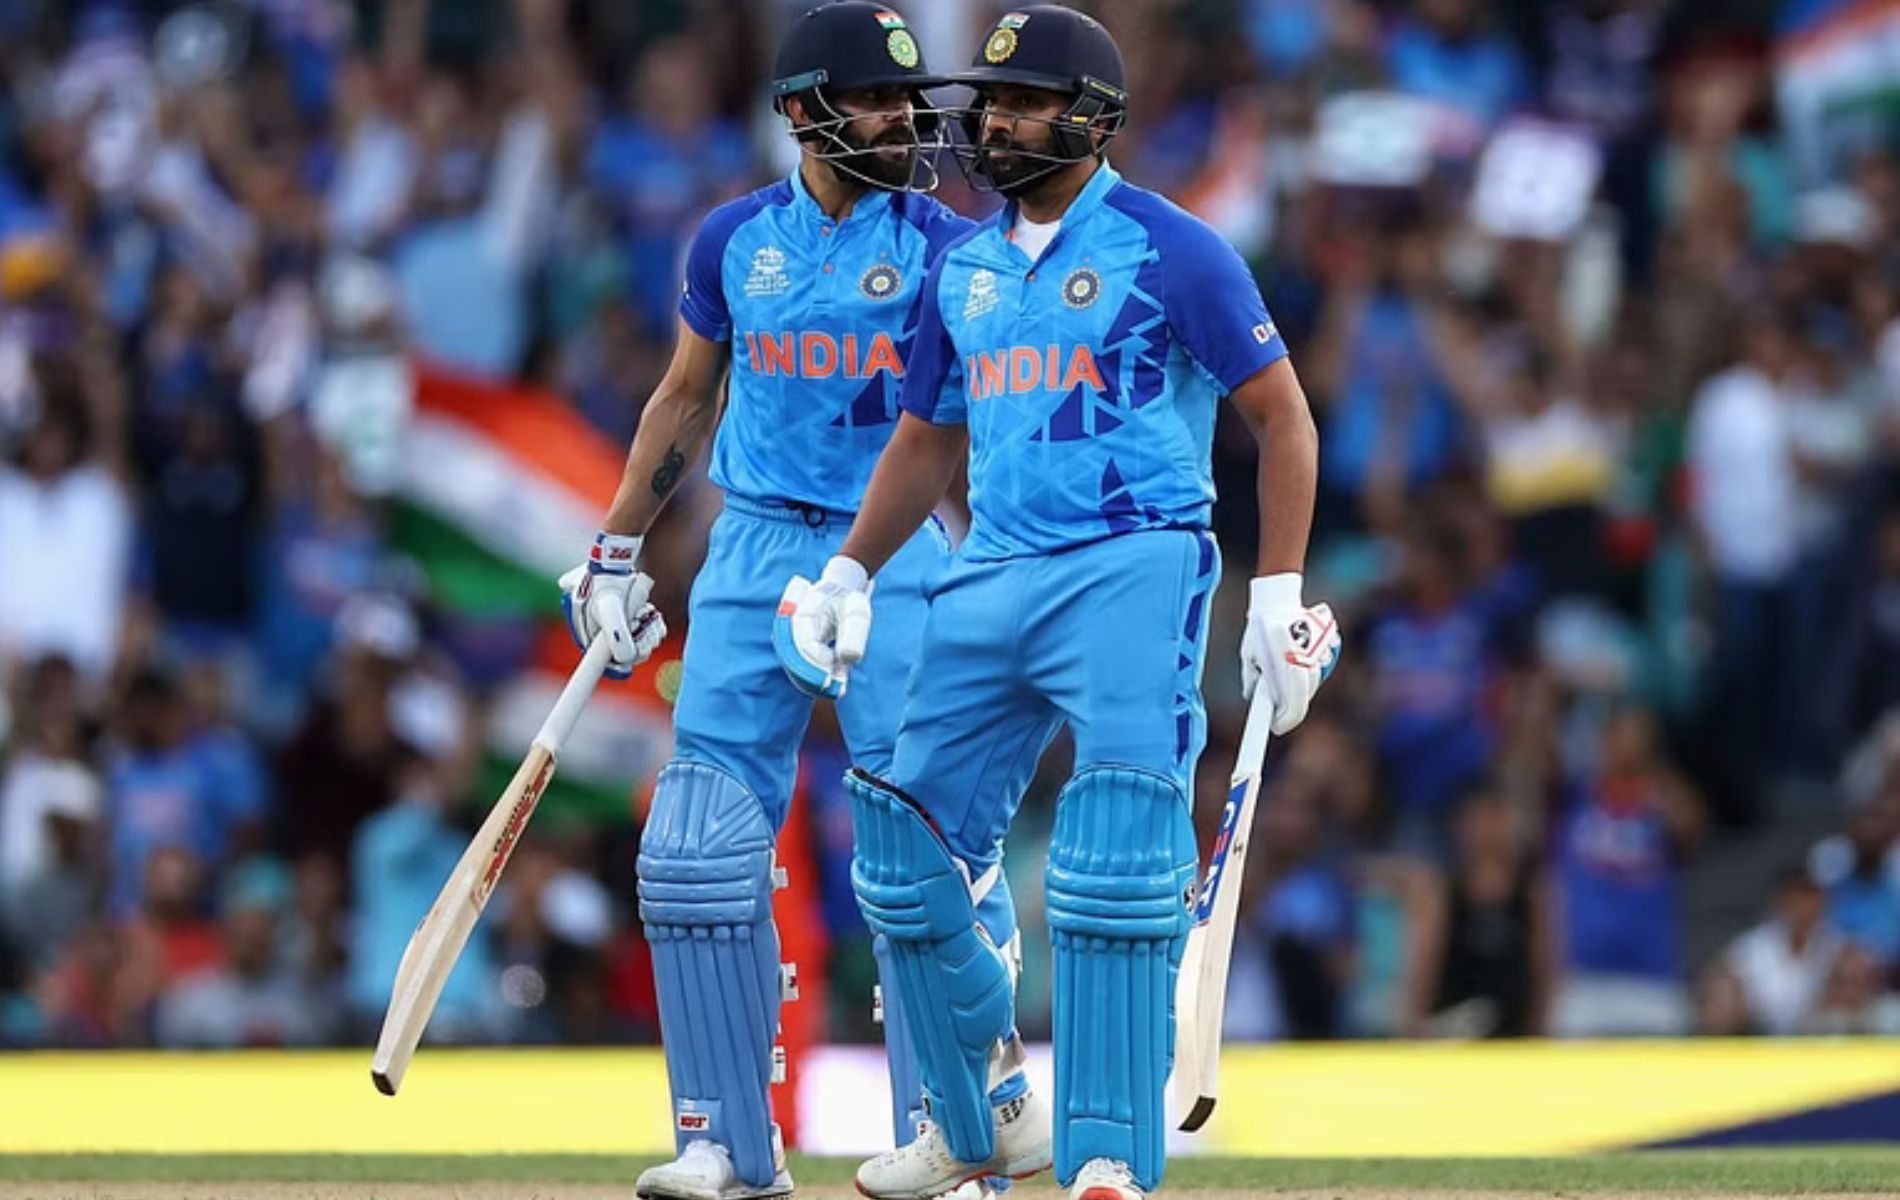 Virat Kohli (L) and Rohit Sharma have a great record vs Pakistan in ODIs. (Pic: Getty)